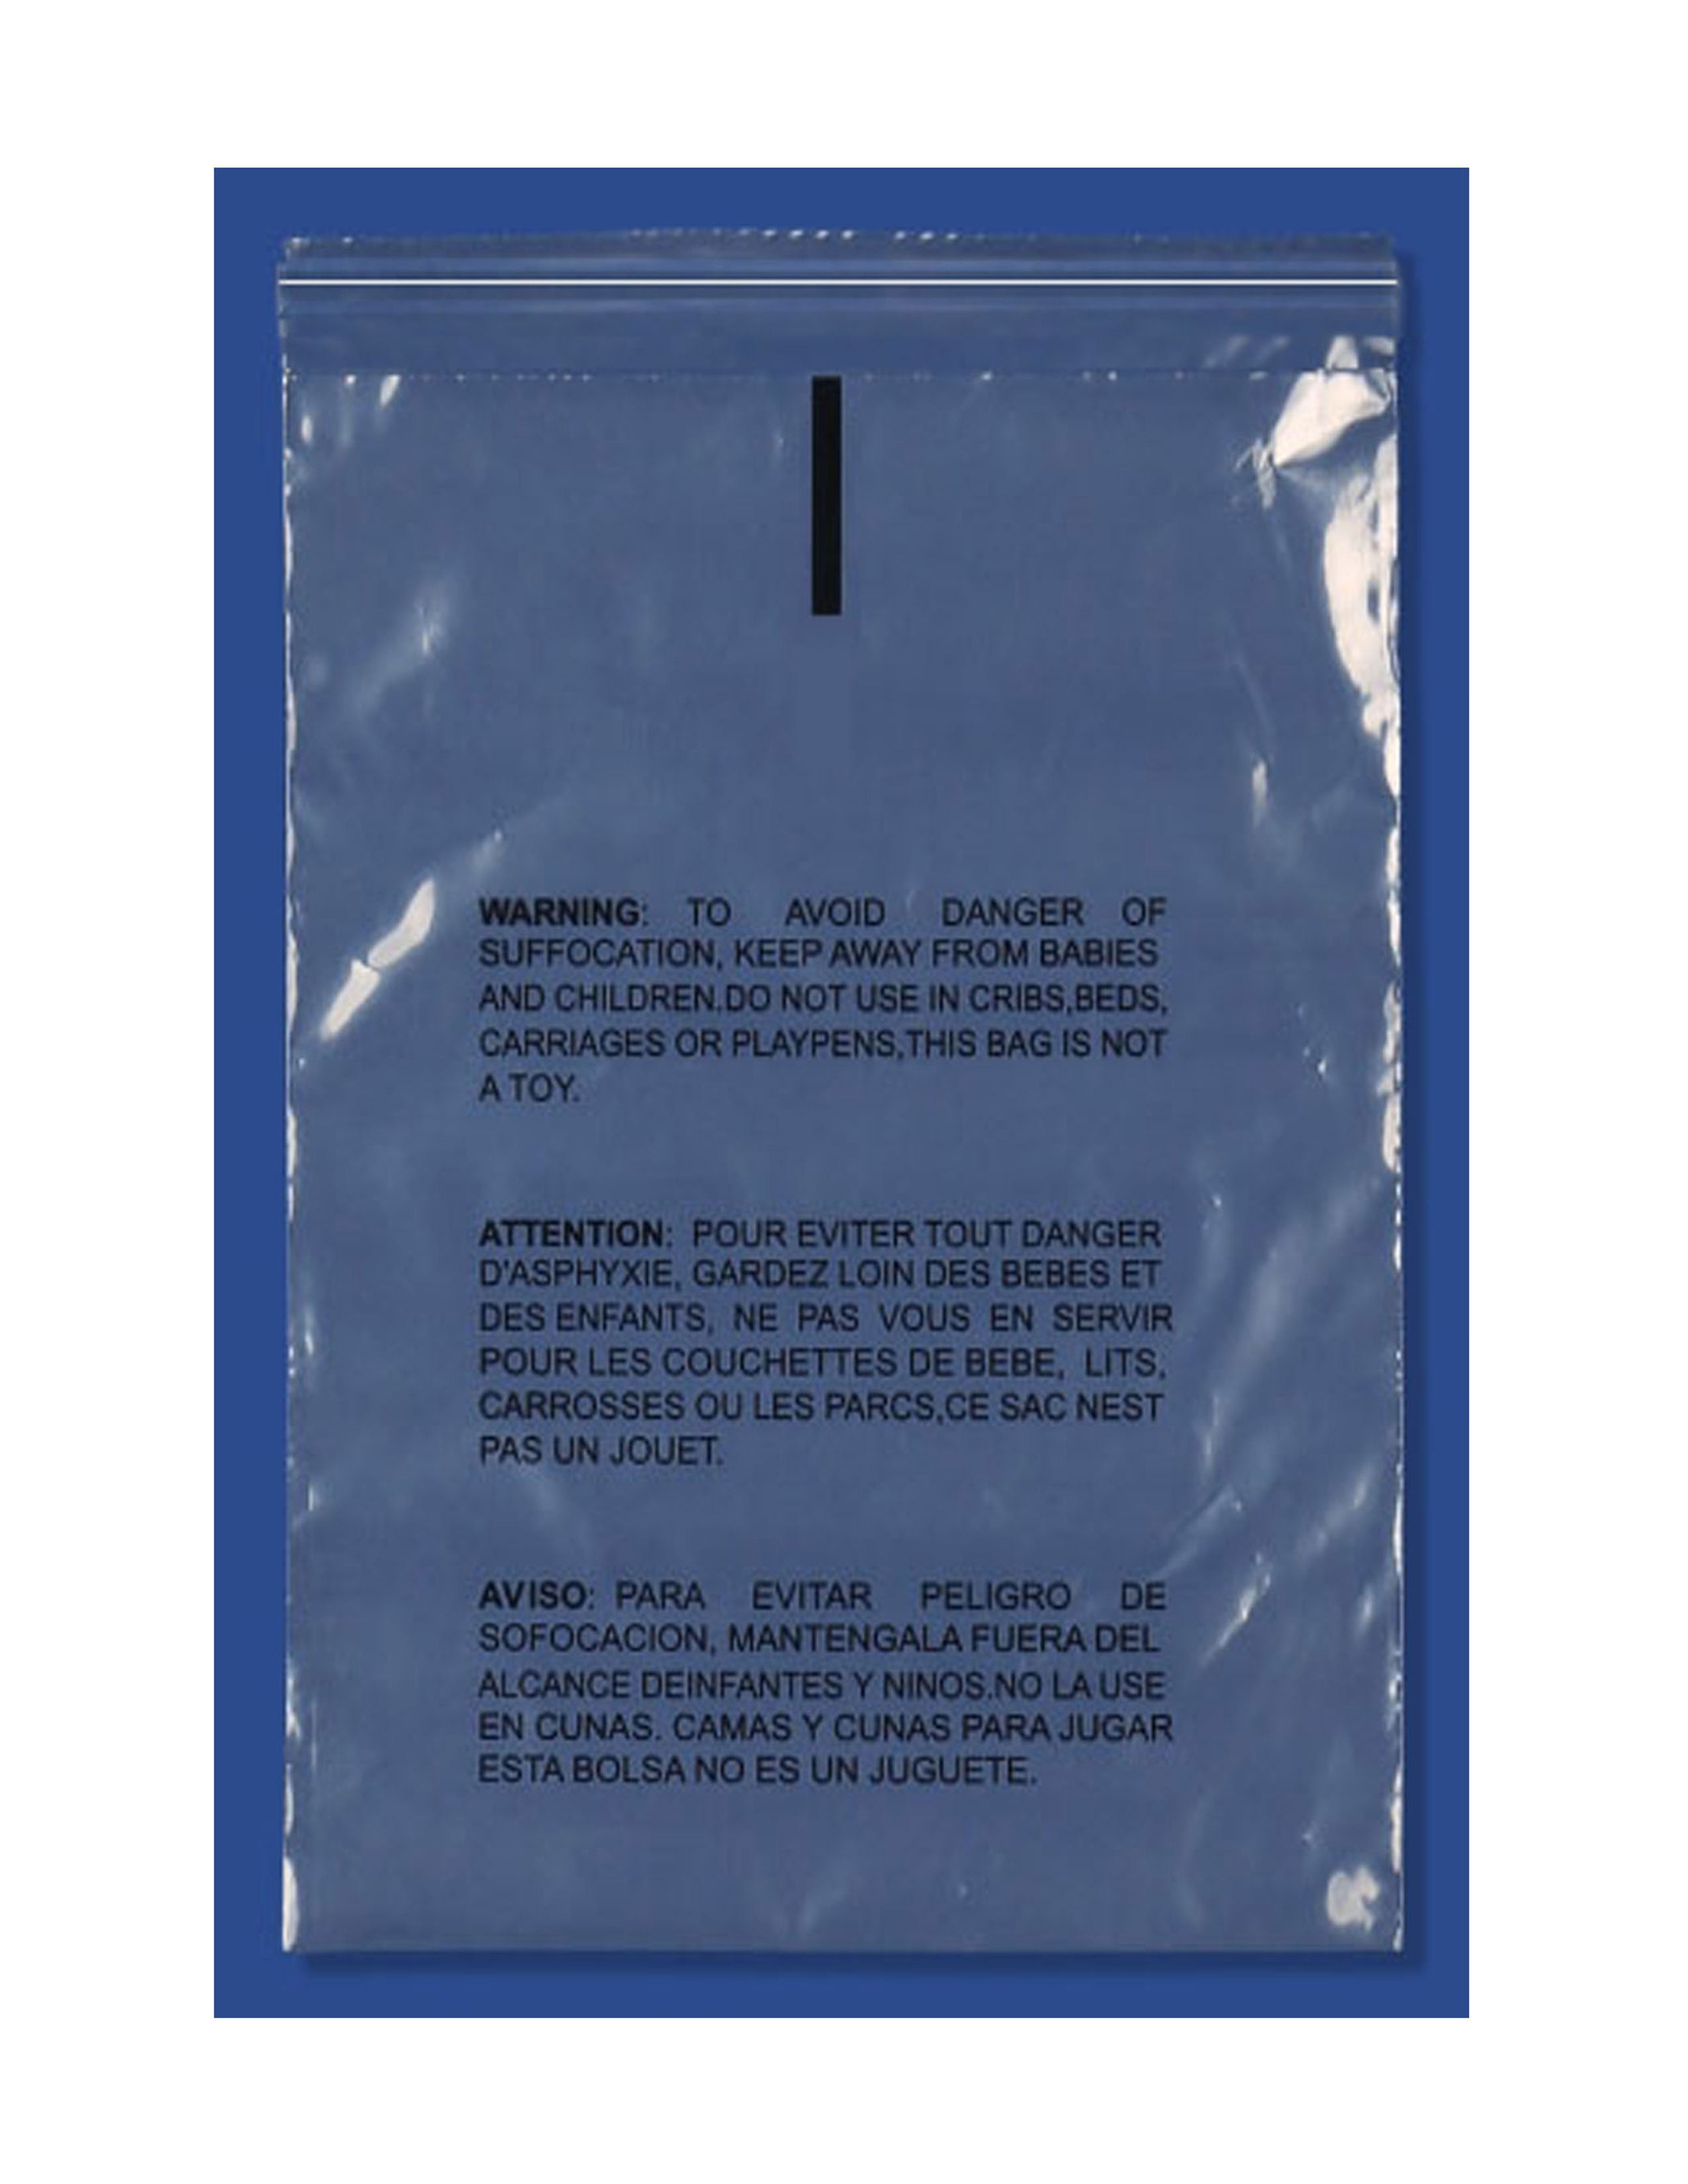 Clear Resealable Poly Bags 16" x 20" with Suffocation Warning 1.5 Mil 500 pcs 